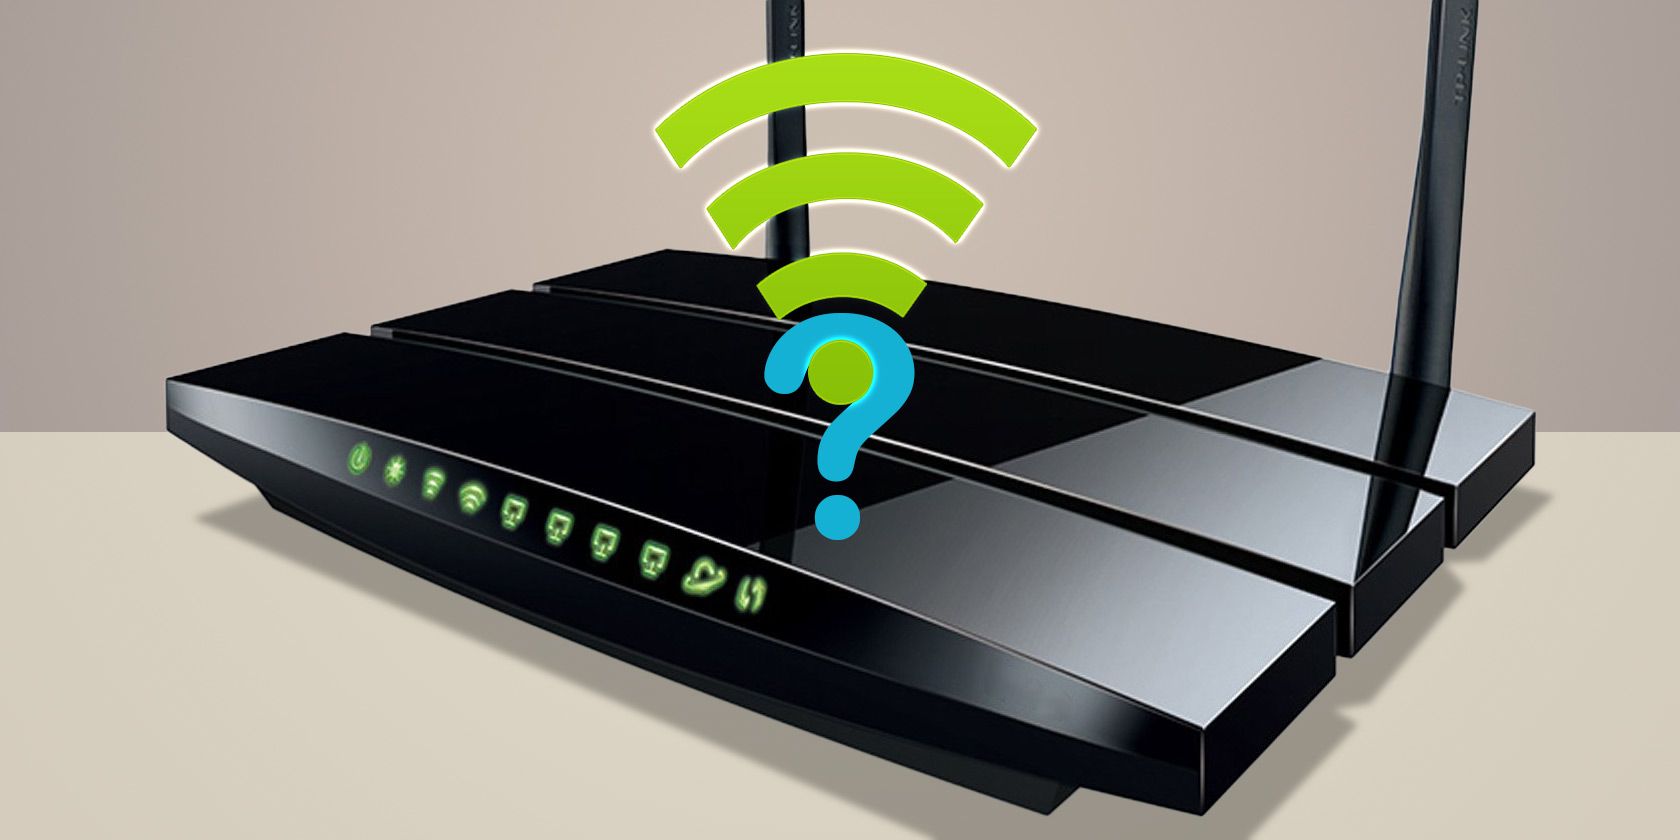 WiFi Router Master instal the new for ios